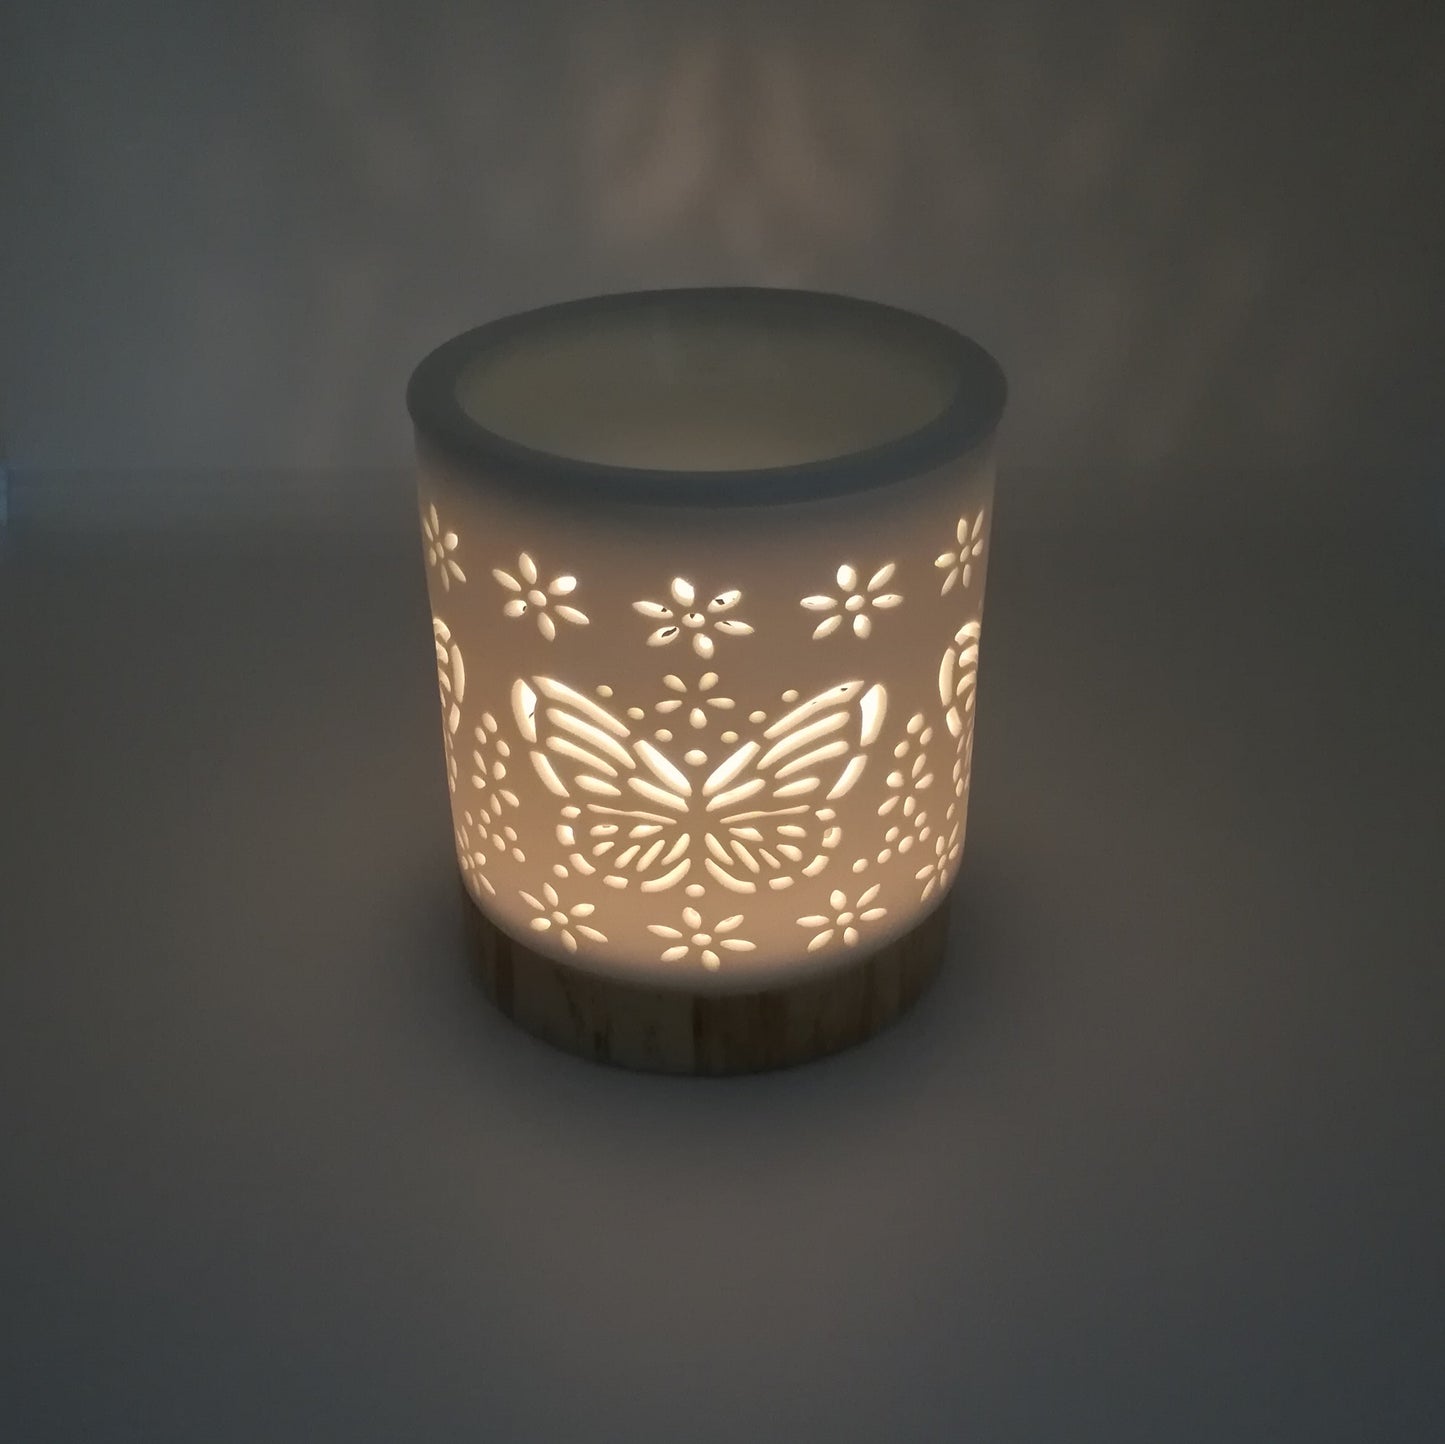 Ceramic white wax melt burner with ceramic wood effect base pictured in semi dark natural light with Butterfly apertures illuminated by the tealight within. (Tealight not included)